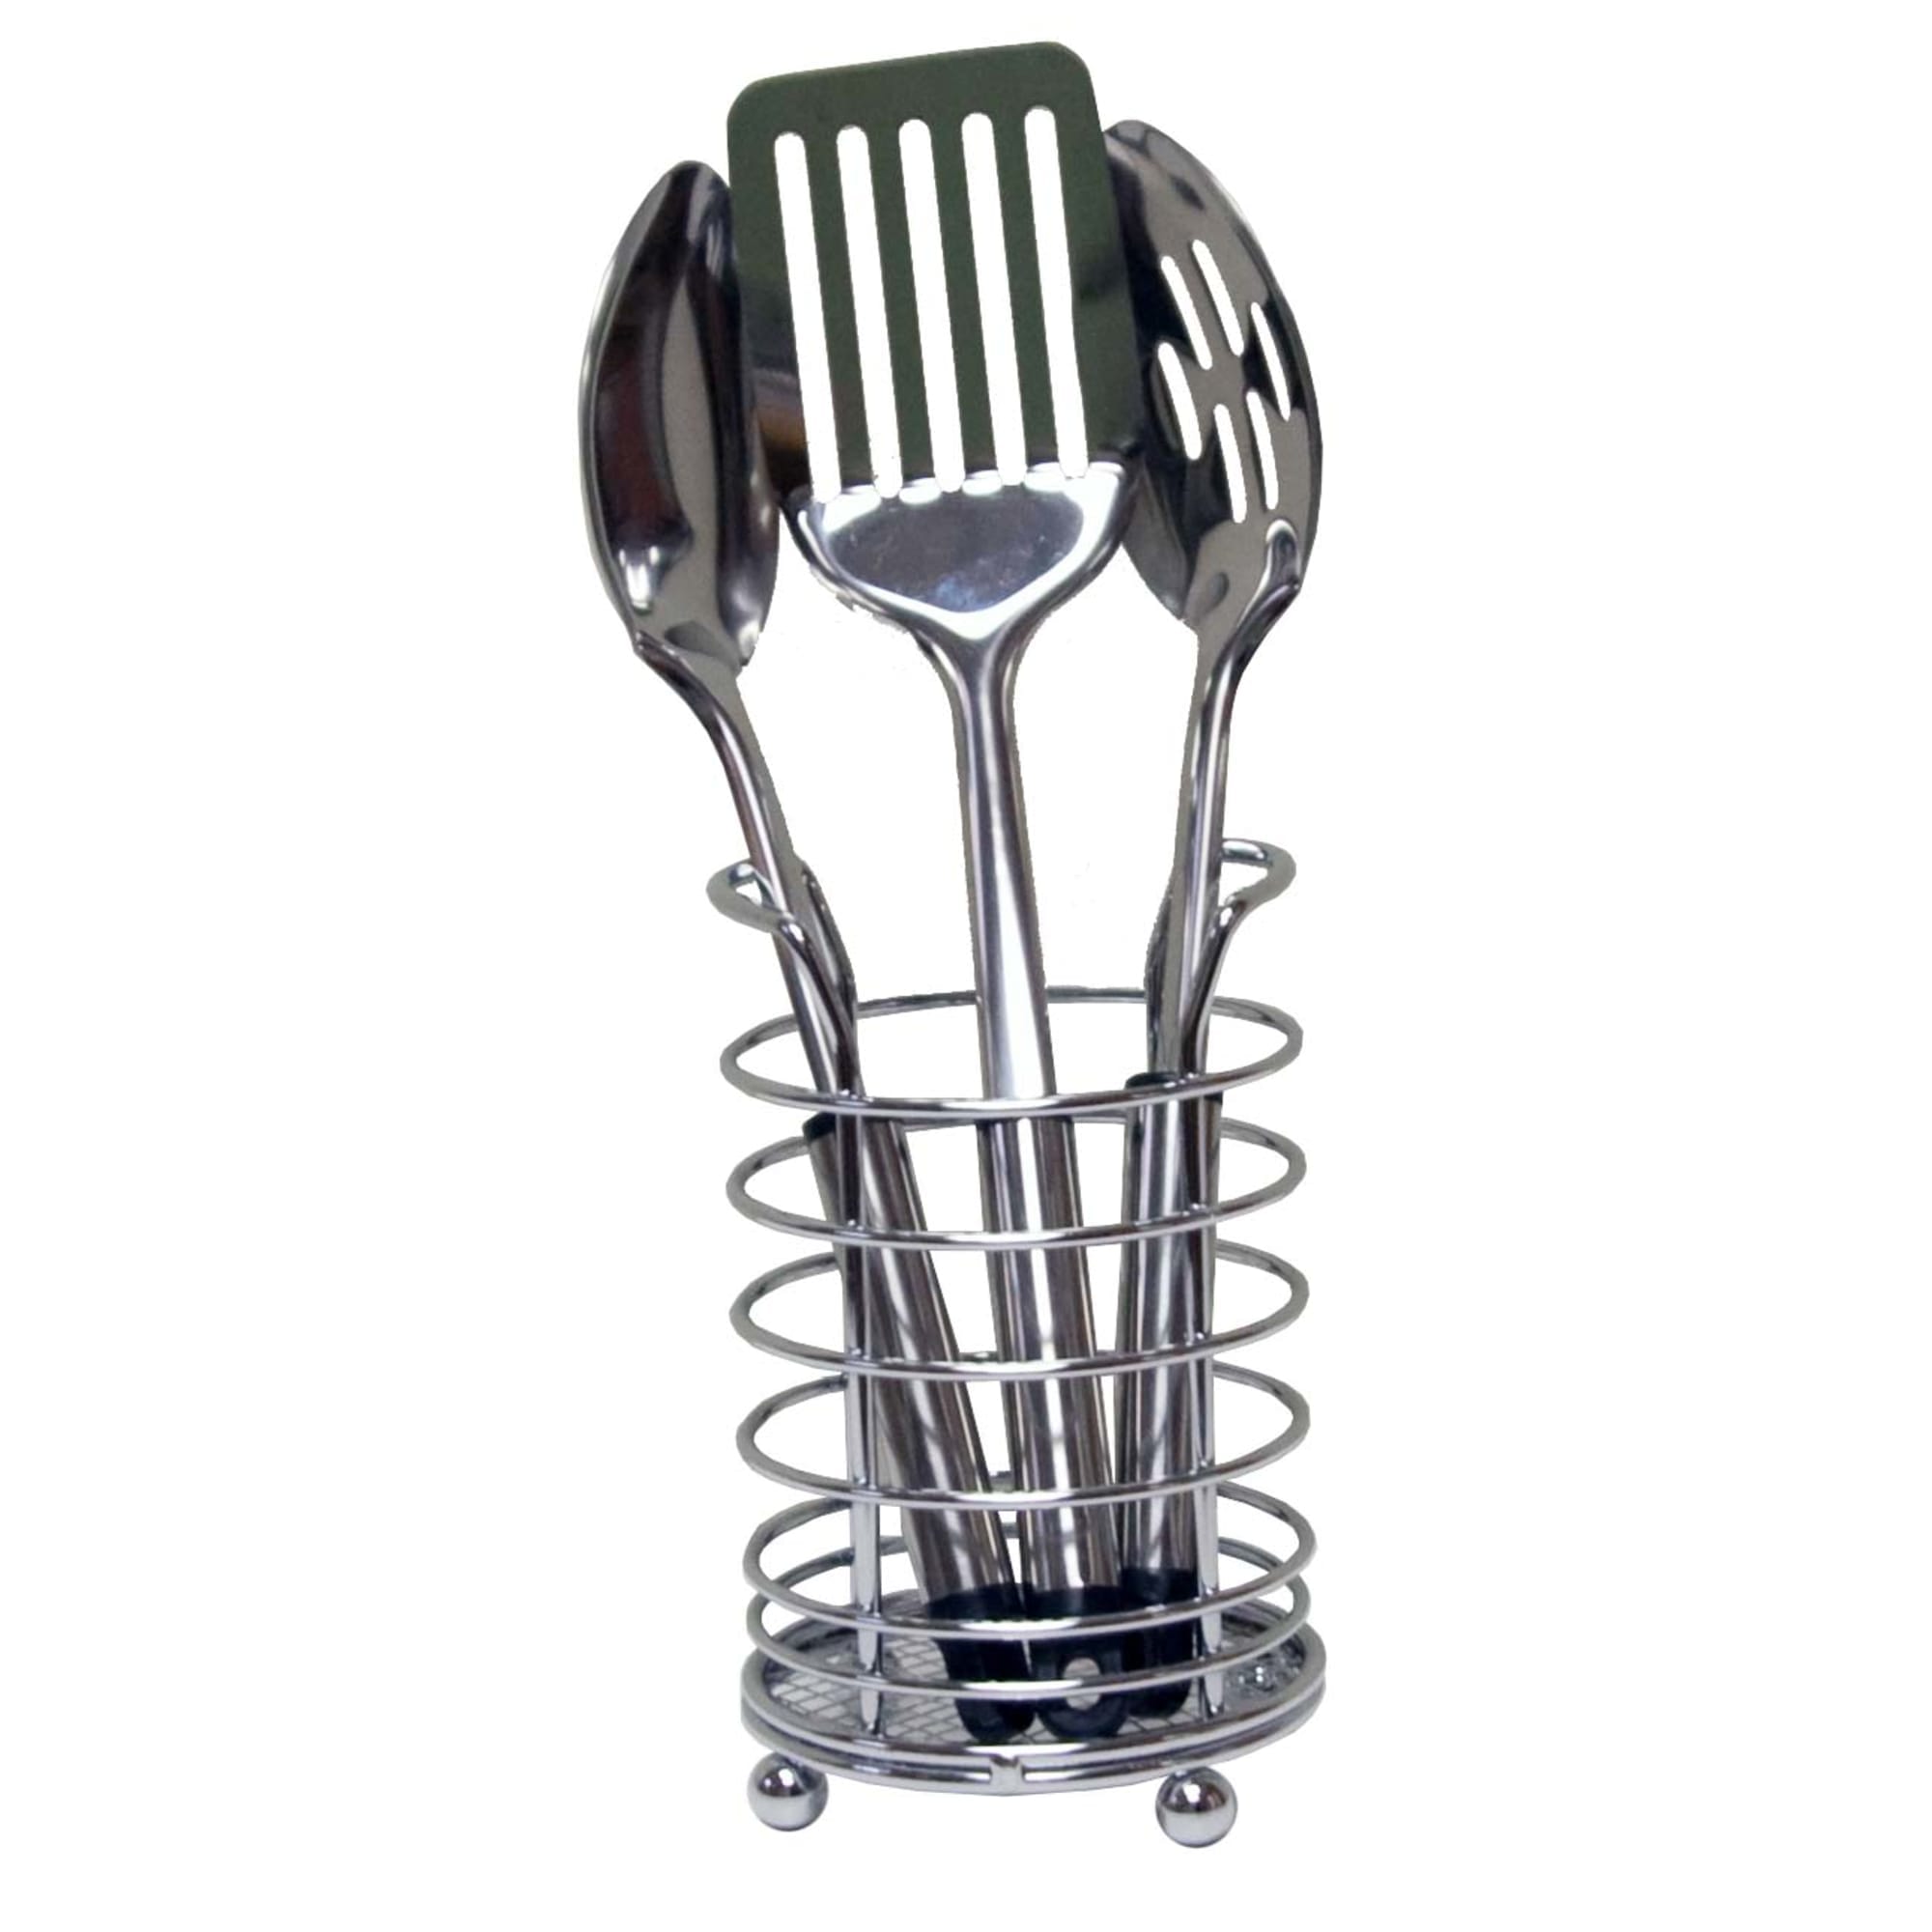 Home Basics Wire Collection Cutlery Holder, Chrome $5 EACH, CASE PACK OF 24